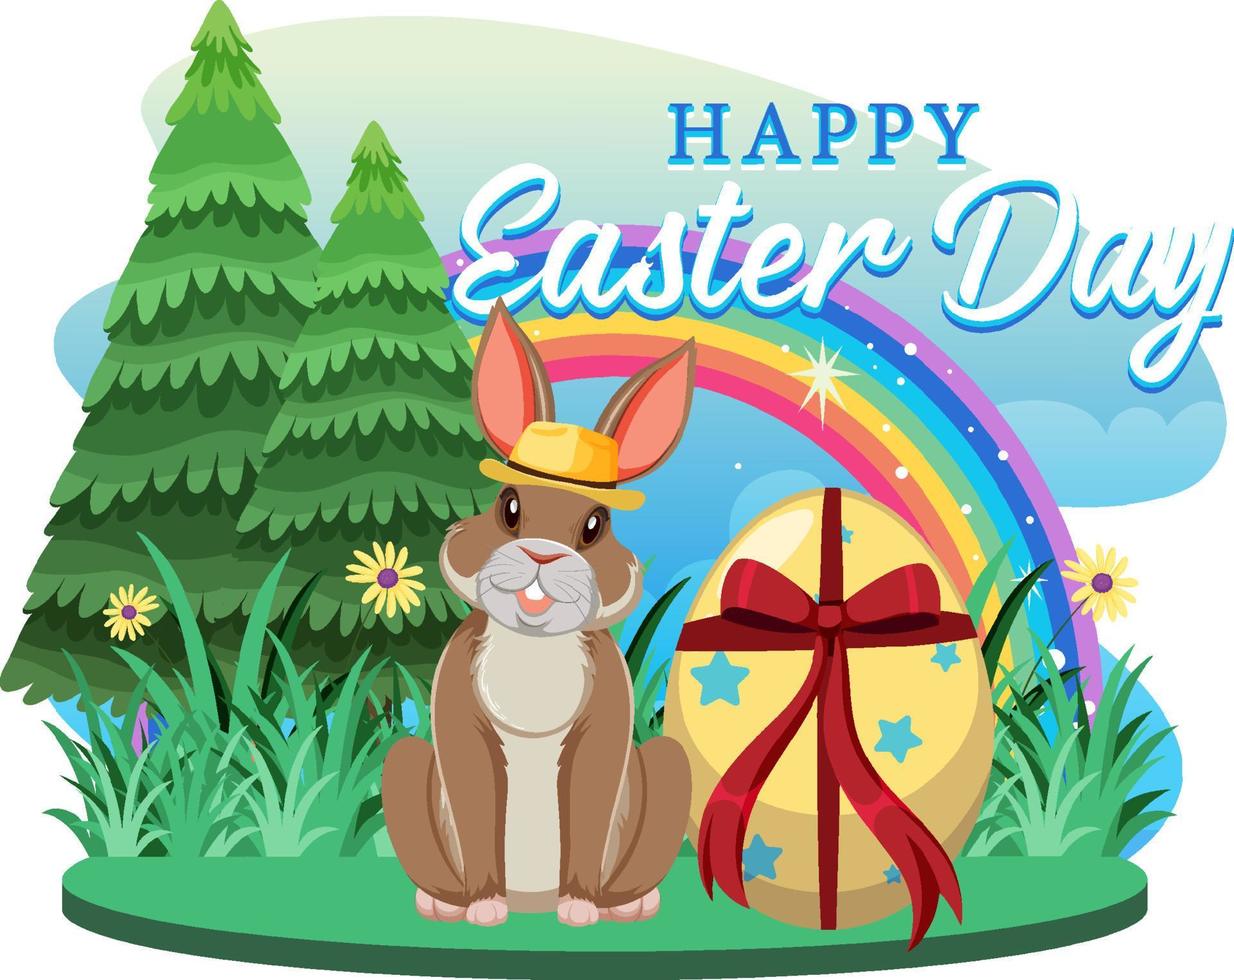 Happy Easter design with bunny and egg vector